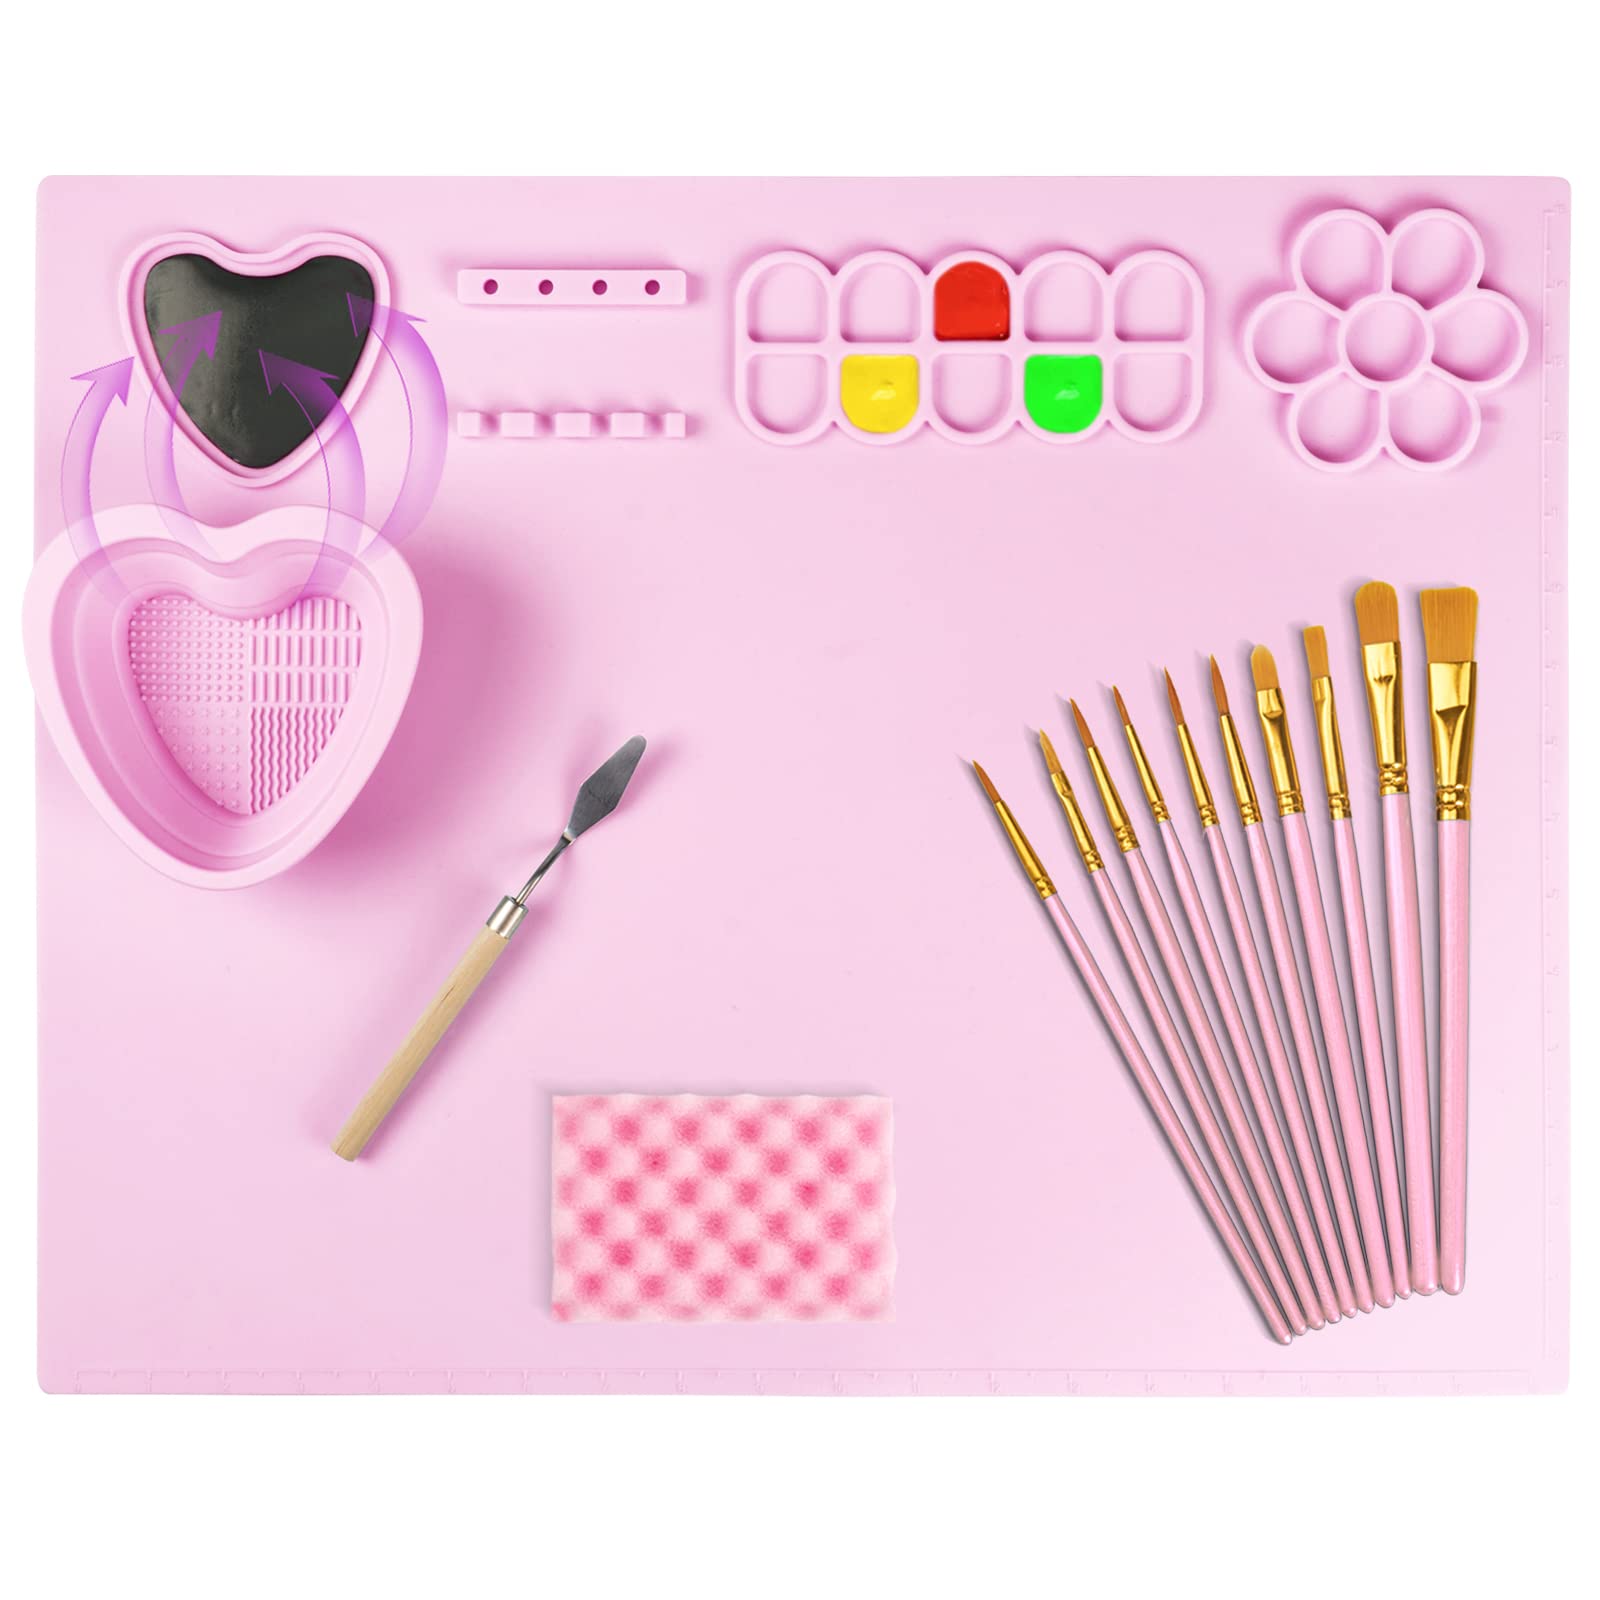  Pink Silicone Mat for Crafts Rabbit 15.7 x 19.7 - Silicone  Art Mat for Kids with Brush Holders Multifunction Craft Silicone Mat for  Crafts with Bunny Cups Painting Mats for Kids